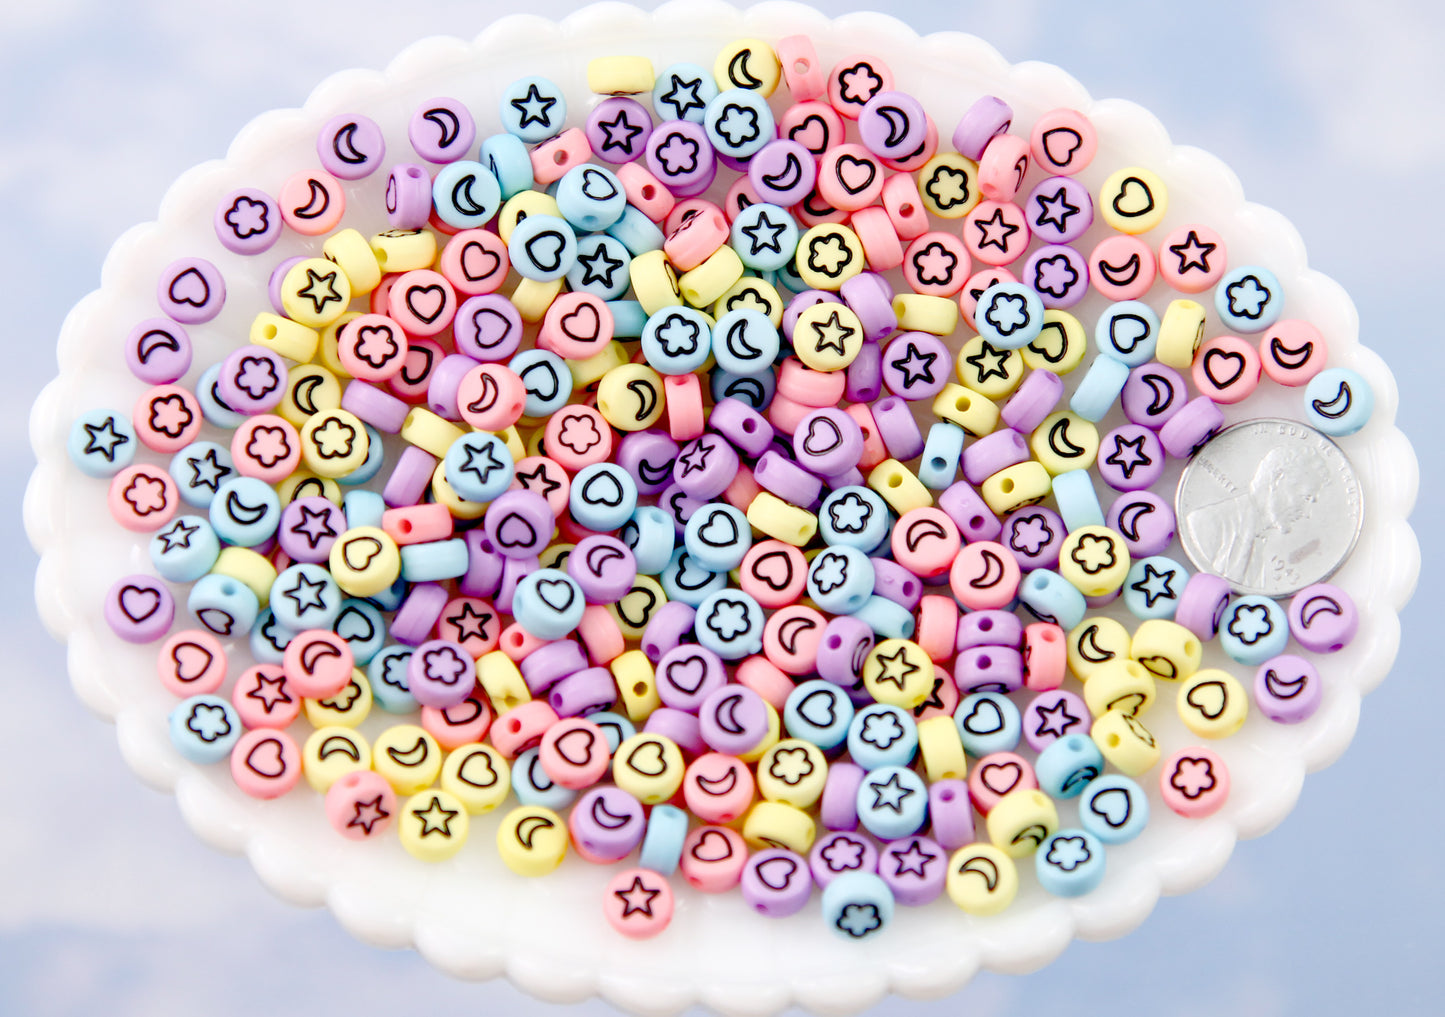 Pastel Symbols for 7mm Letter Beads - 7mm Pastel Moon Heart Flower and Star Symbols for Alphabet Beads Acrylic or Resin Beads - 300 pc set